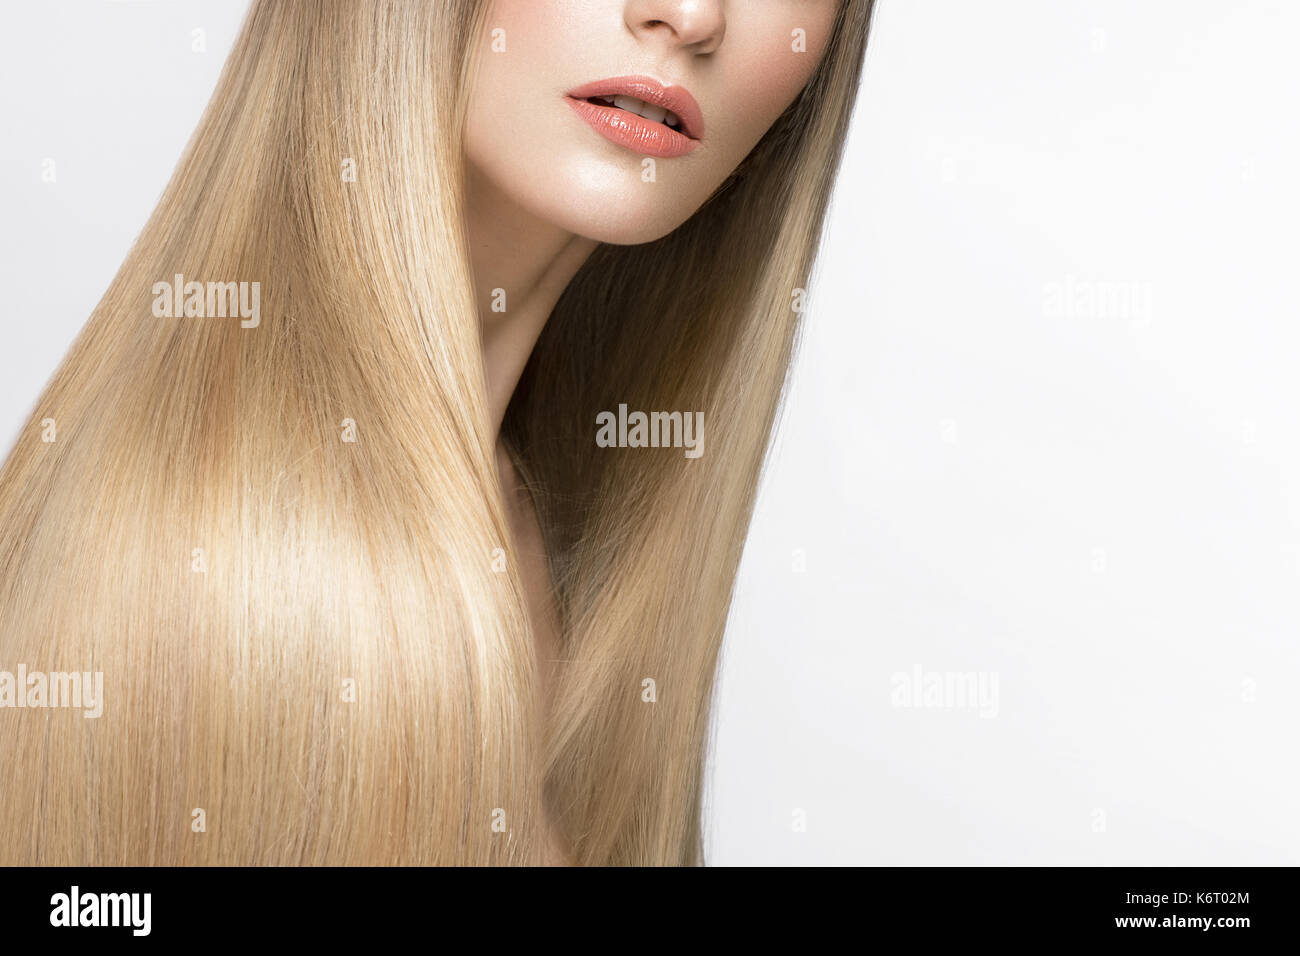 Beautiful blond girl with a perfectly smooth hair, and classic make-up. Beauty face. Stock Photo